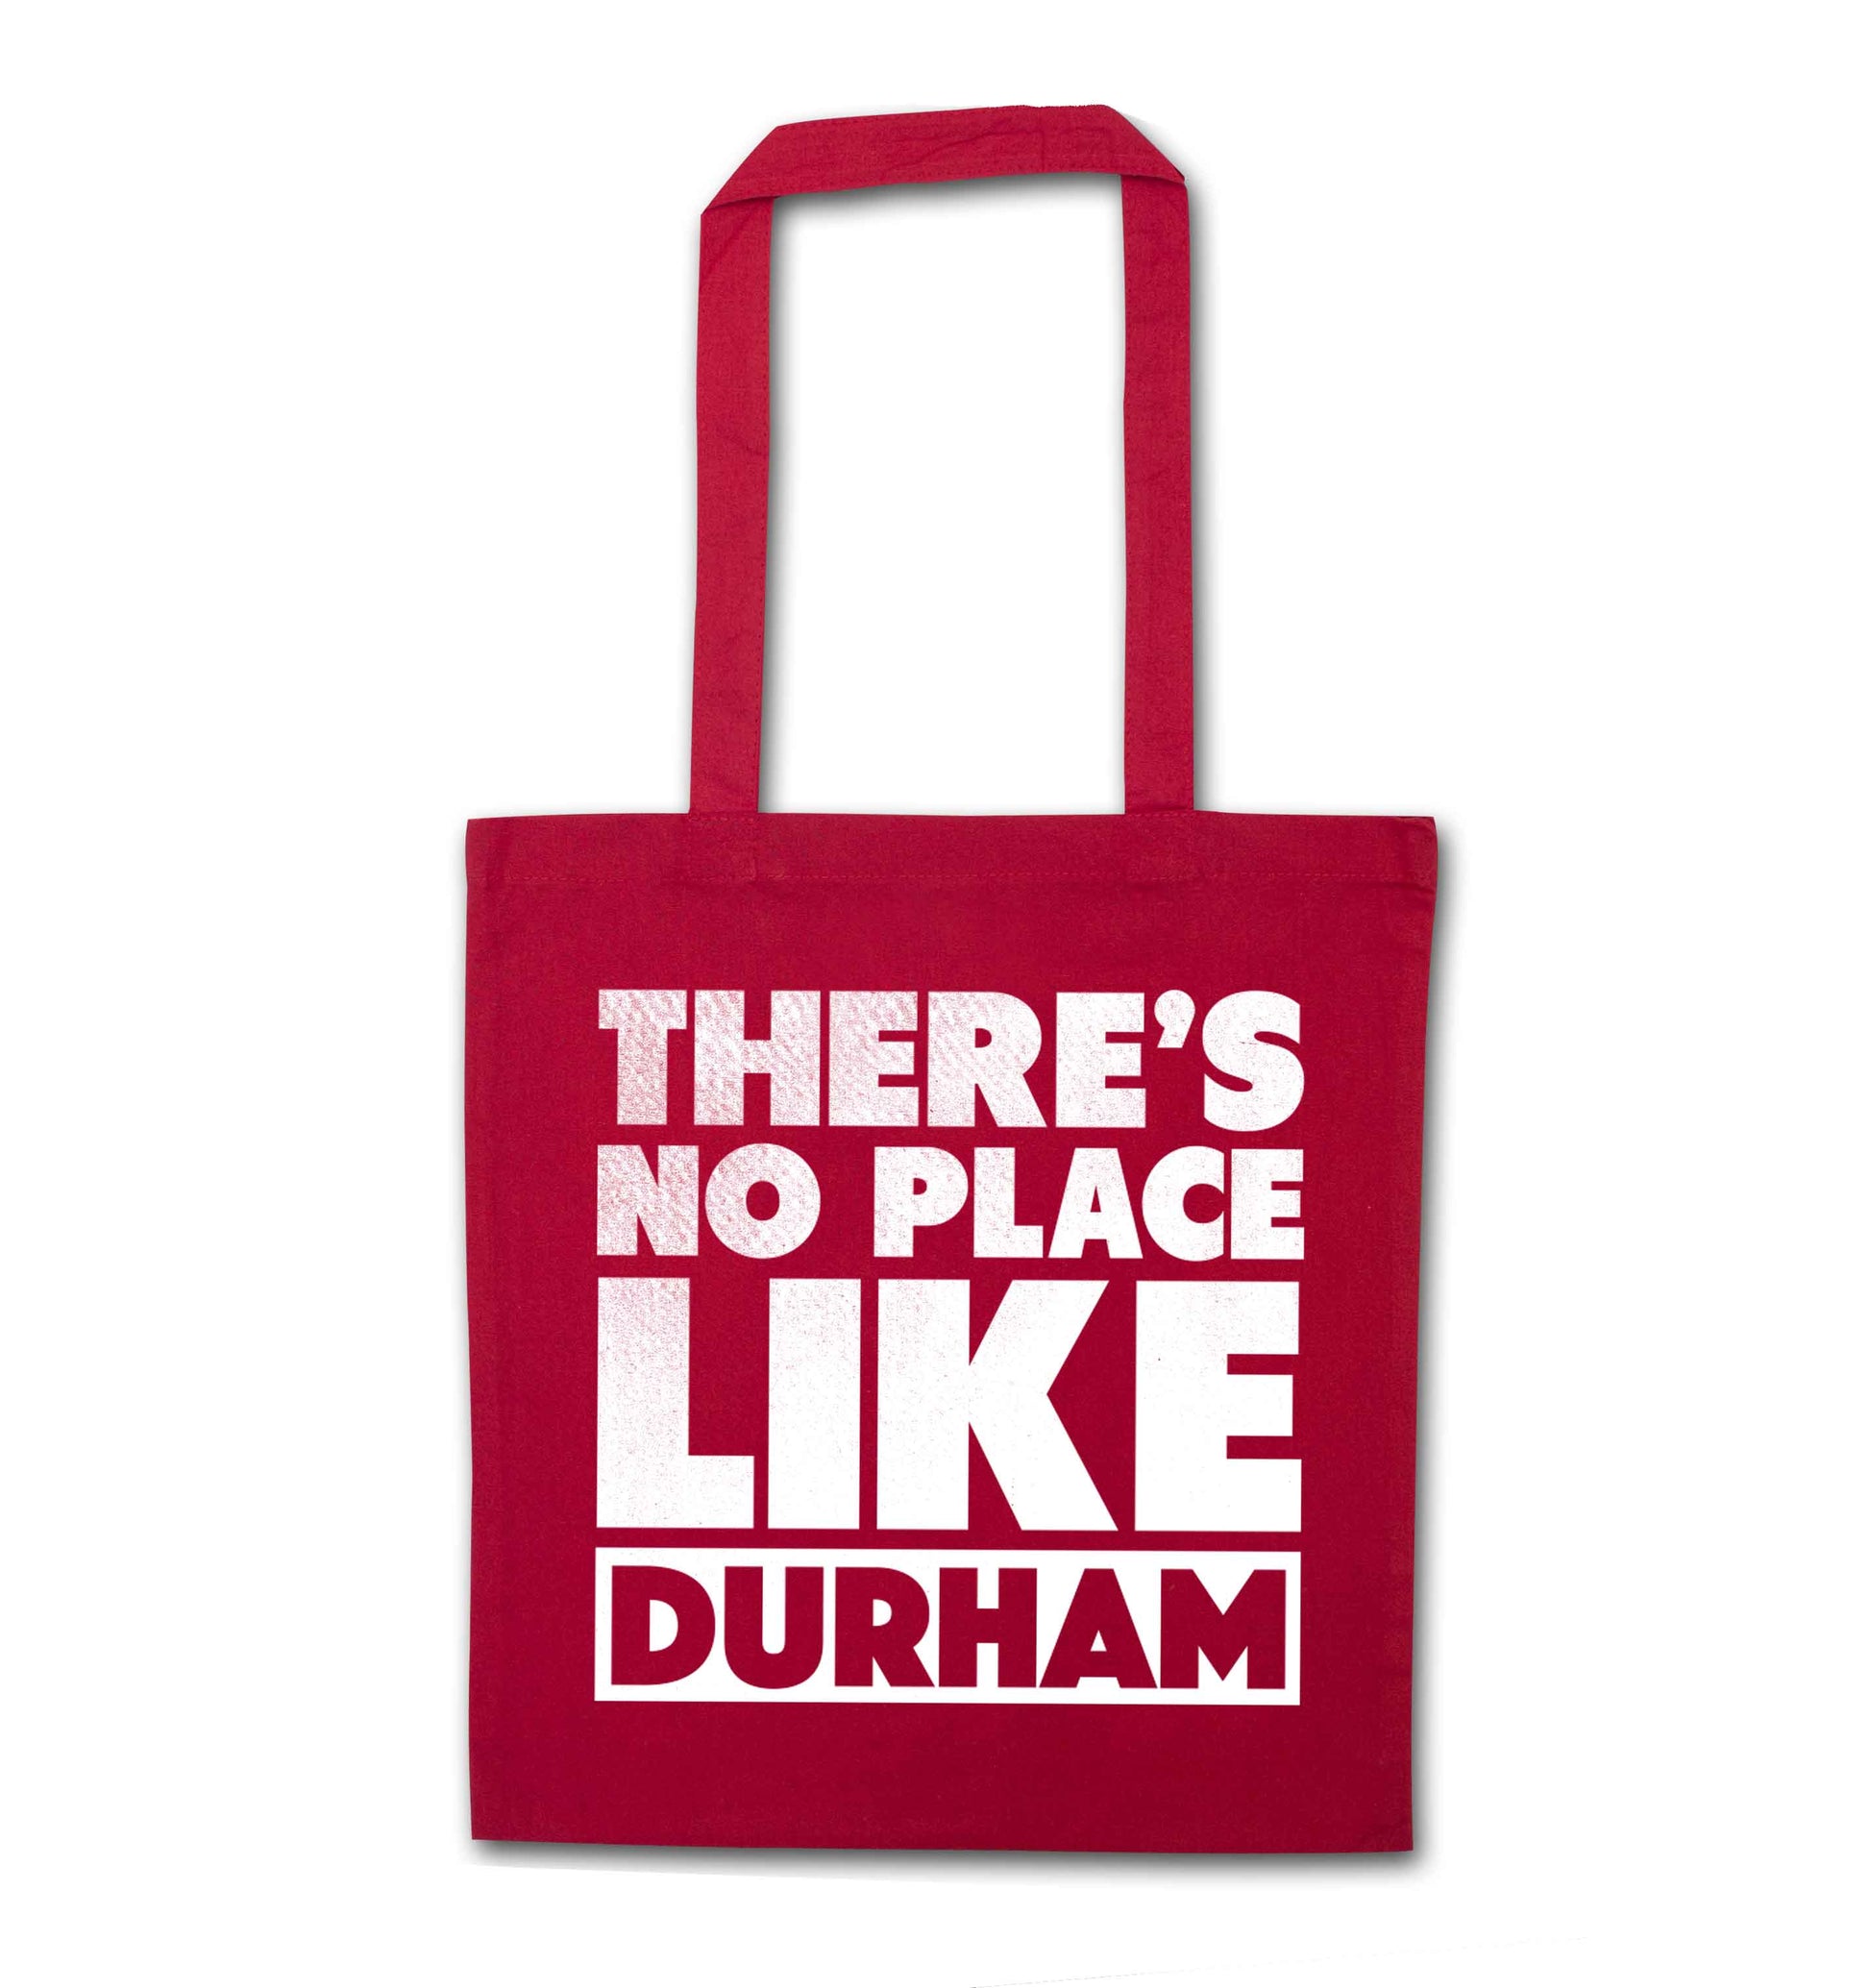 There's no place like Durham red tote bag